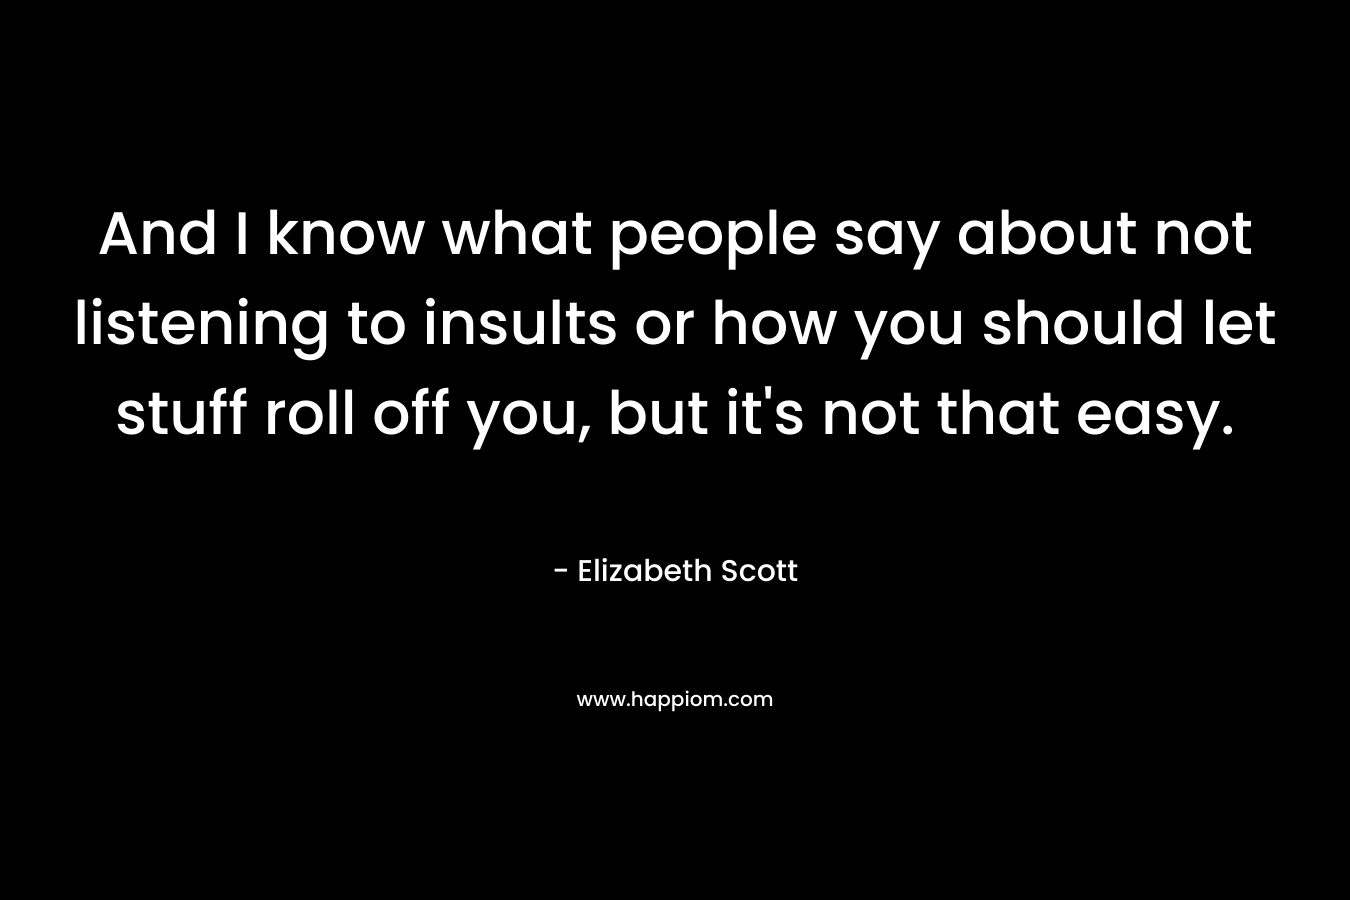 And I know what people say about not listening to insults or how you should let stuff roll off you, but it’s not that easy. – Elizabeth Scott